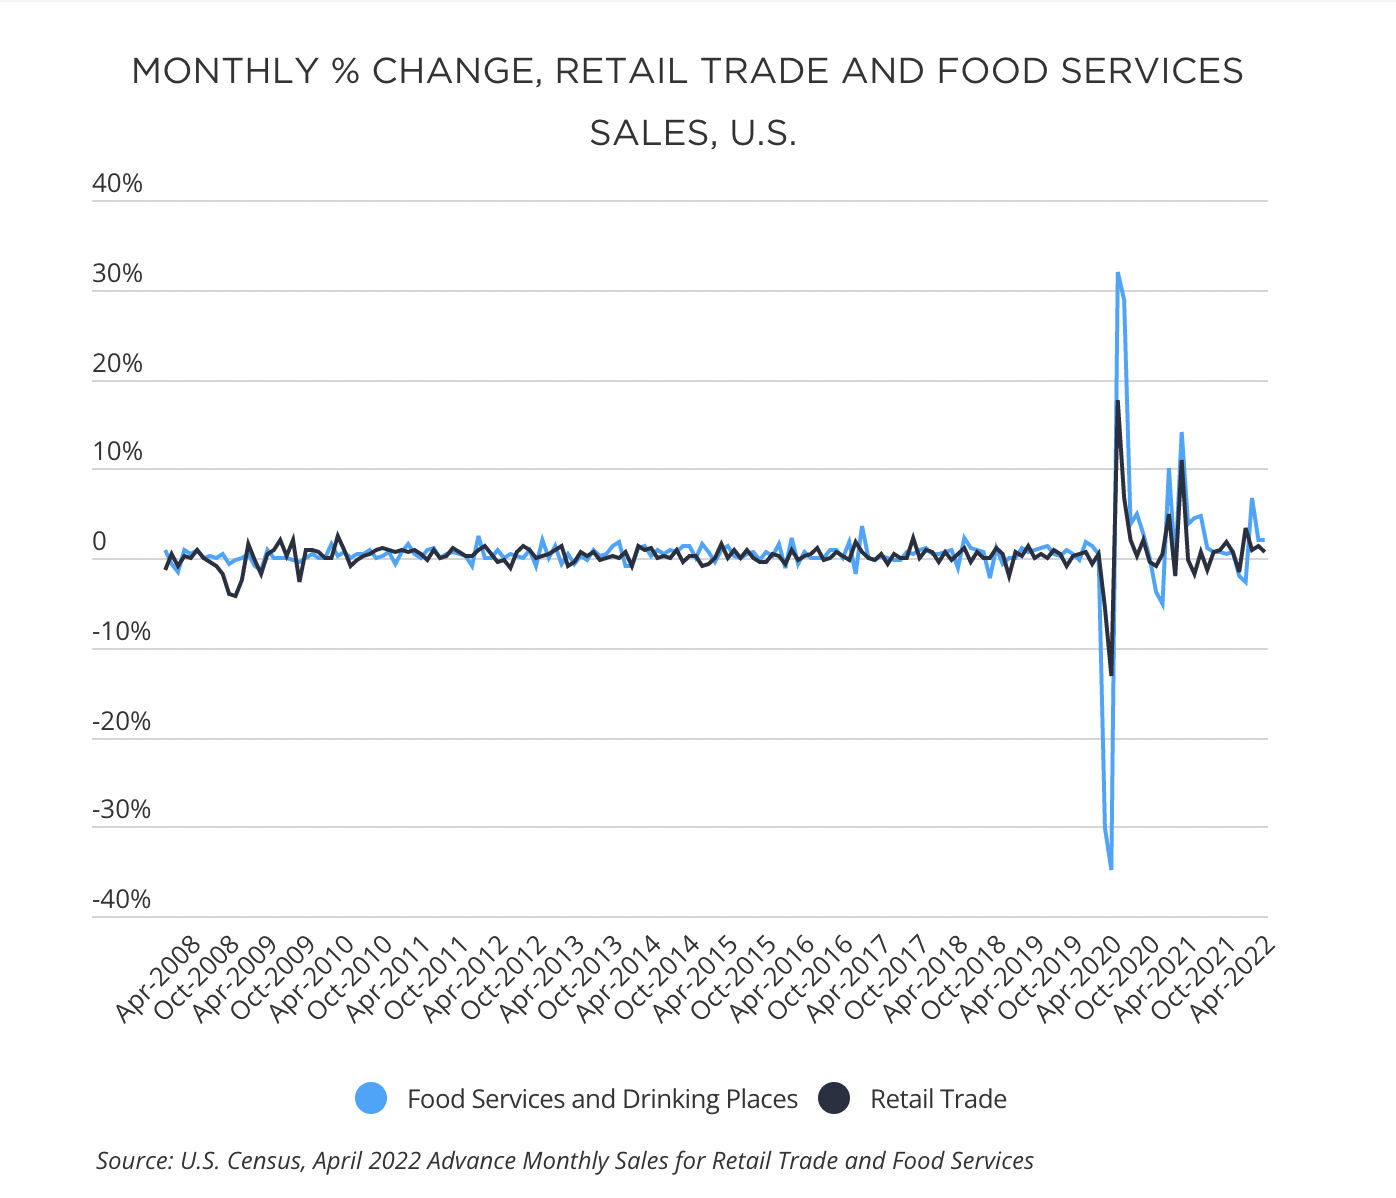 Monthly % change, retail trade and food services sales, US